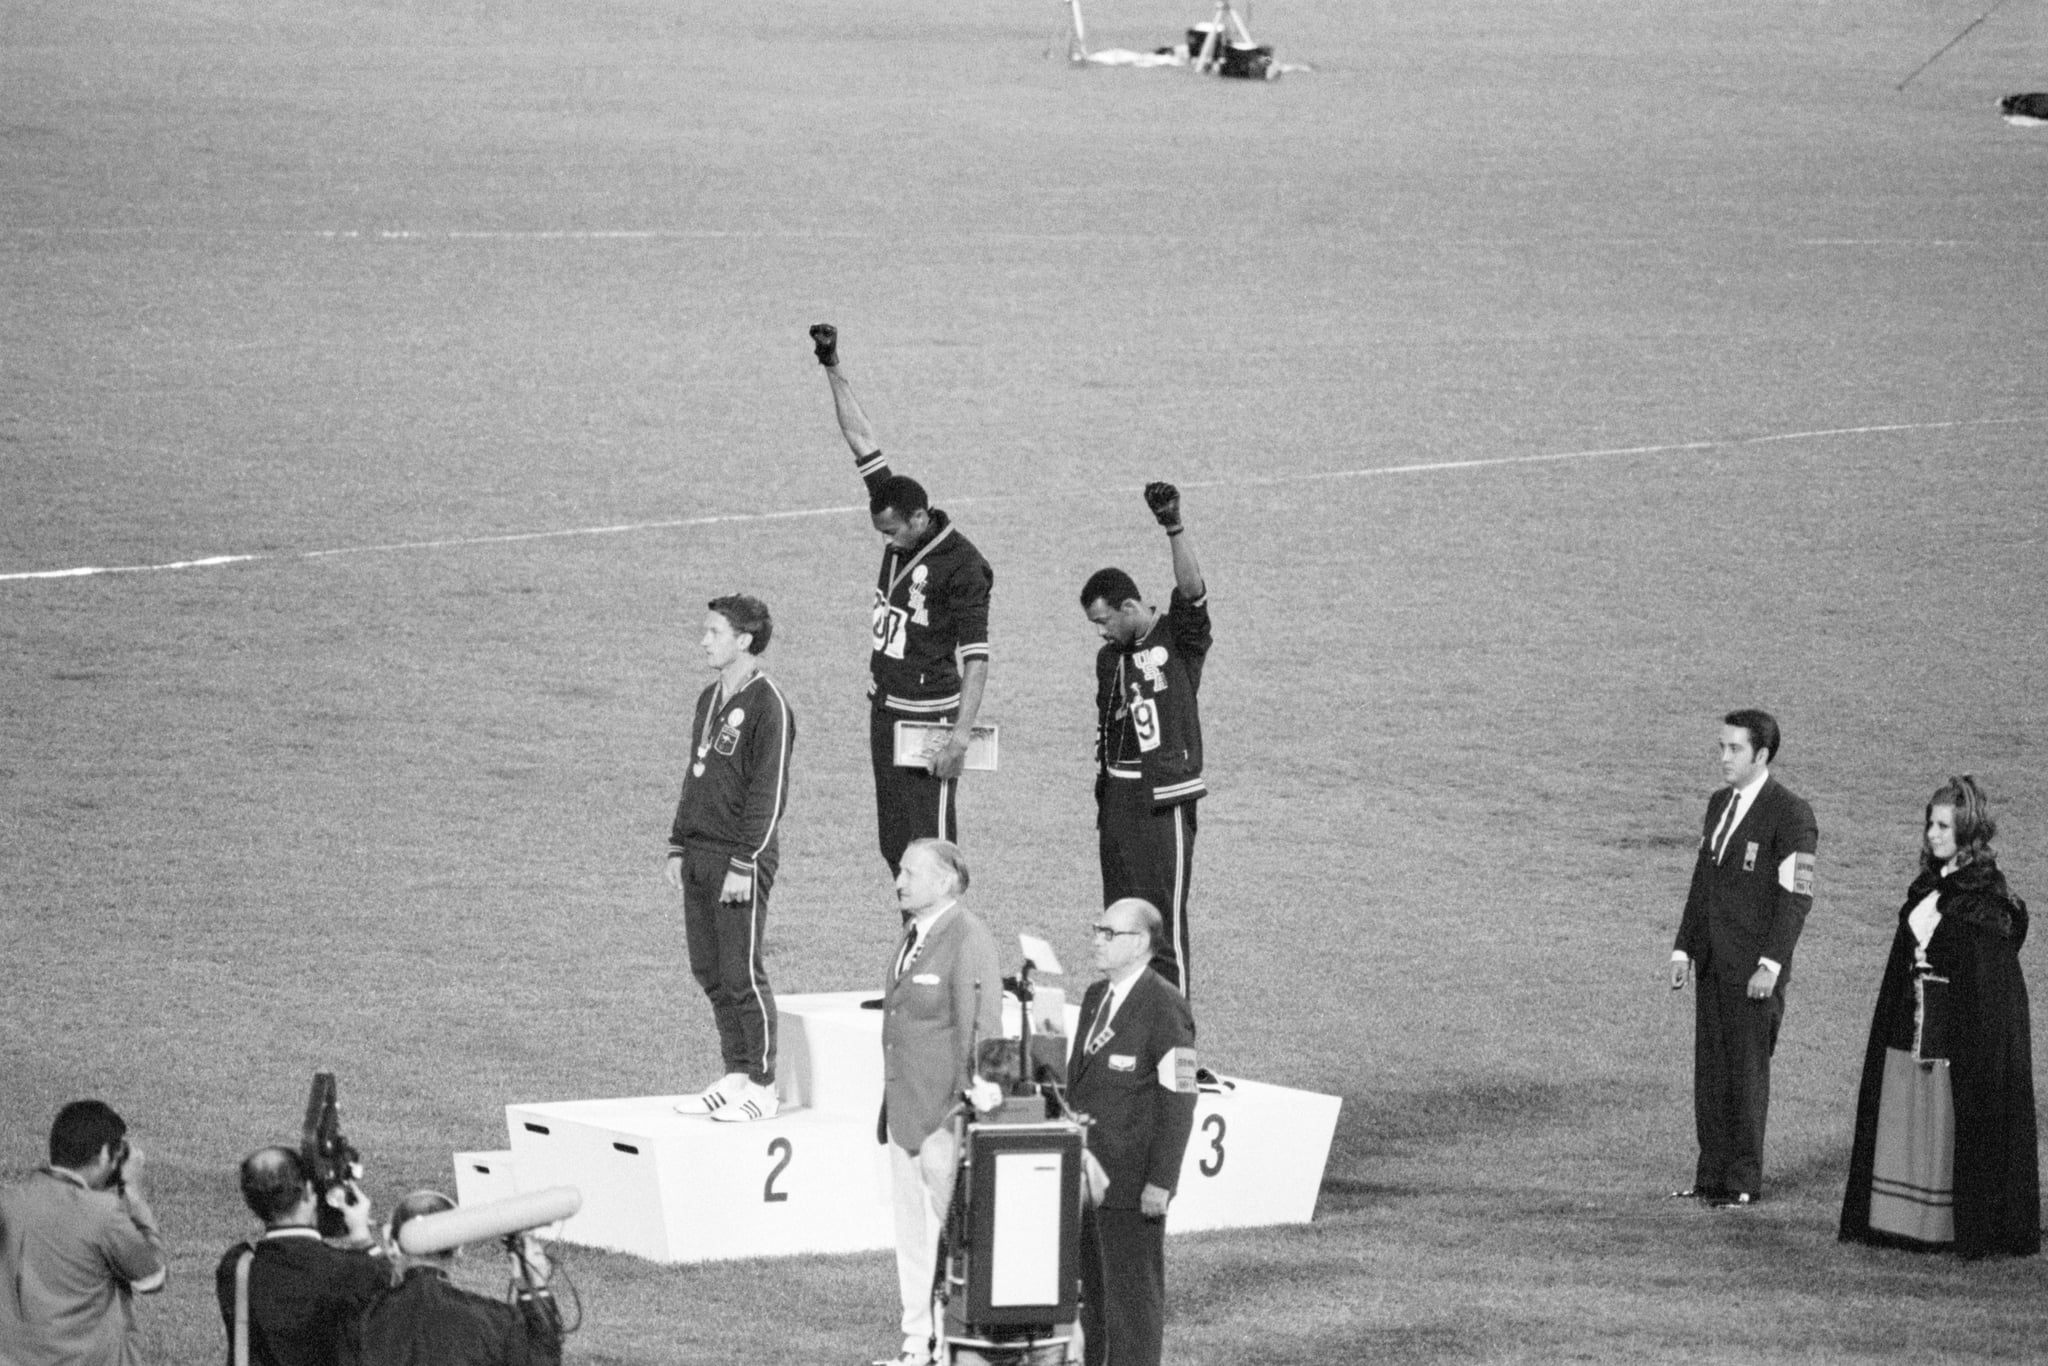 Tommie Smith and John Carlos, gold and bronze medalists in the 200-meter run at the 1968 Olympic Games, engage in a victory stand protest against unfair treatment of blacks in the United States. With heads lowered and black-gloved fists raised in the black power salute, they refuse to recognise the American flag and national anthem. Australian Peter Norman is the silver medalist.